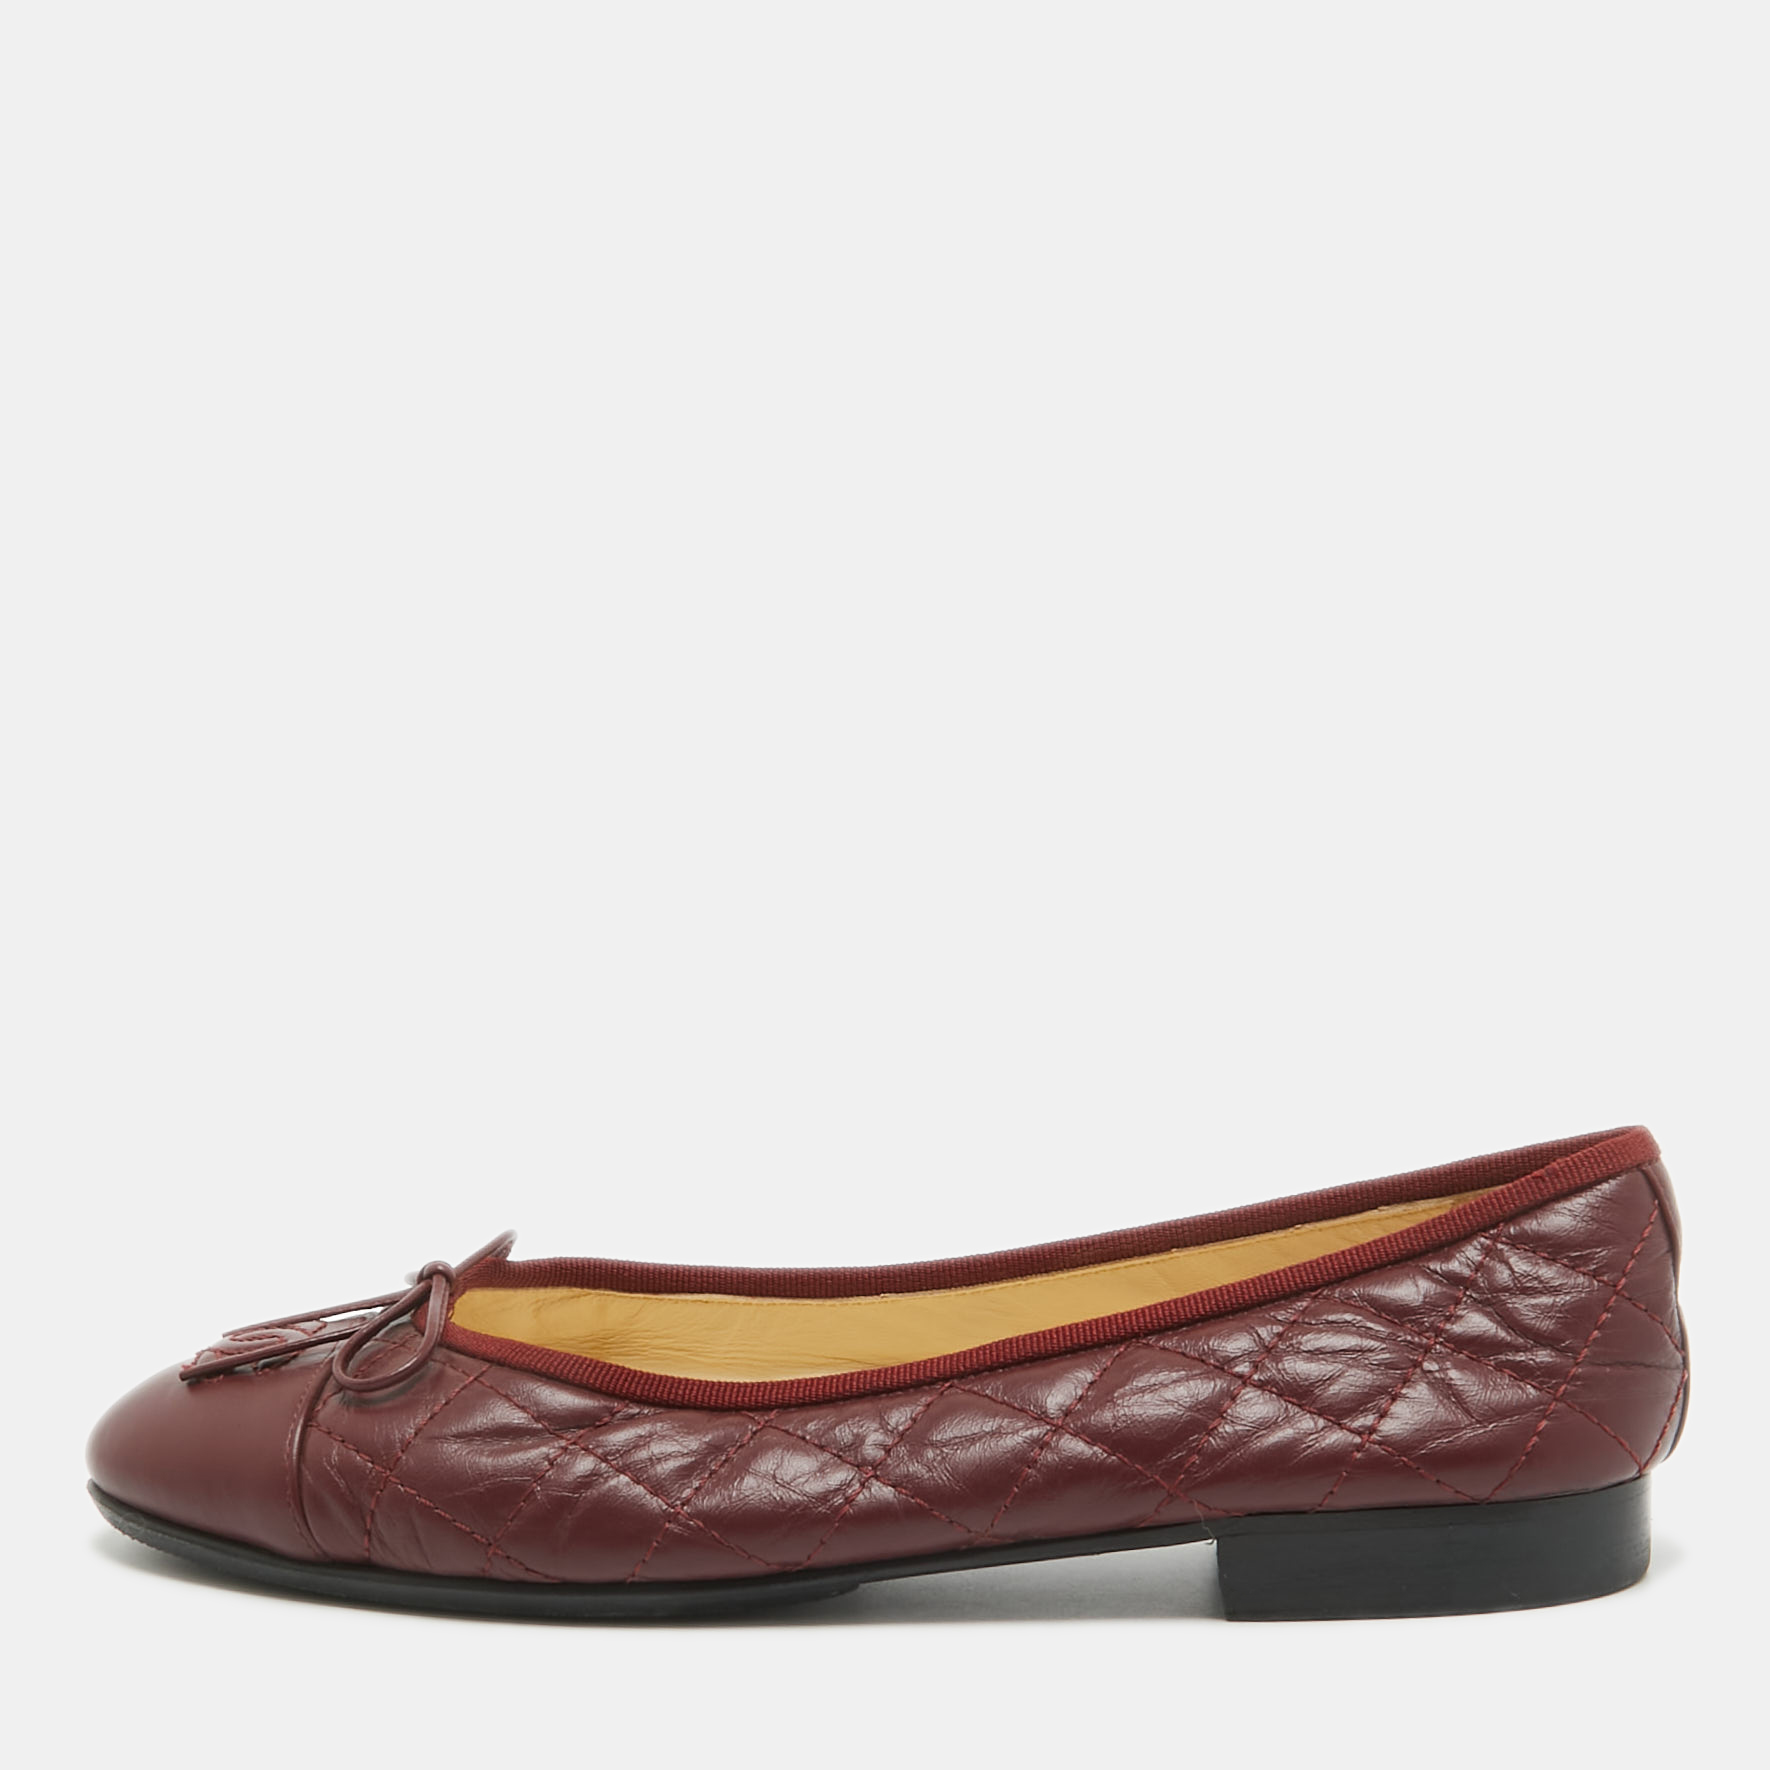 Pre-owned Chanel Burgundy Leather Cc Ballet Flats Size 37